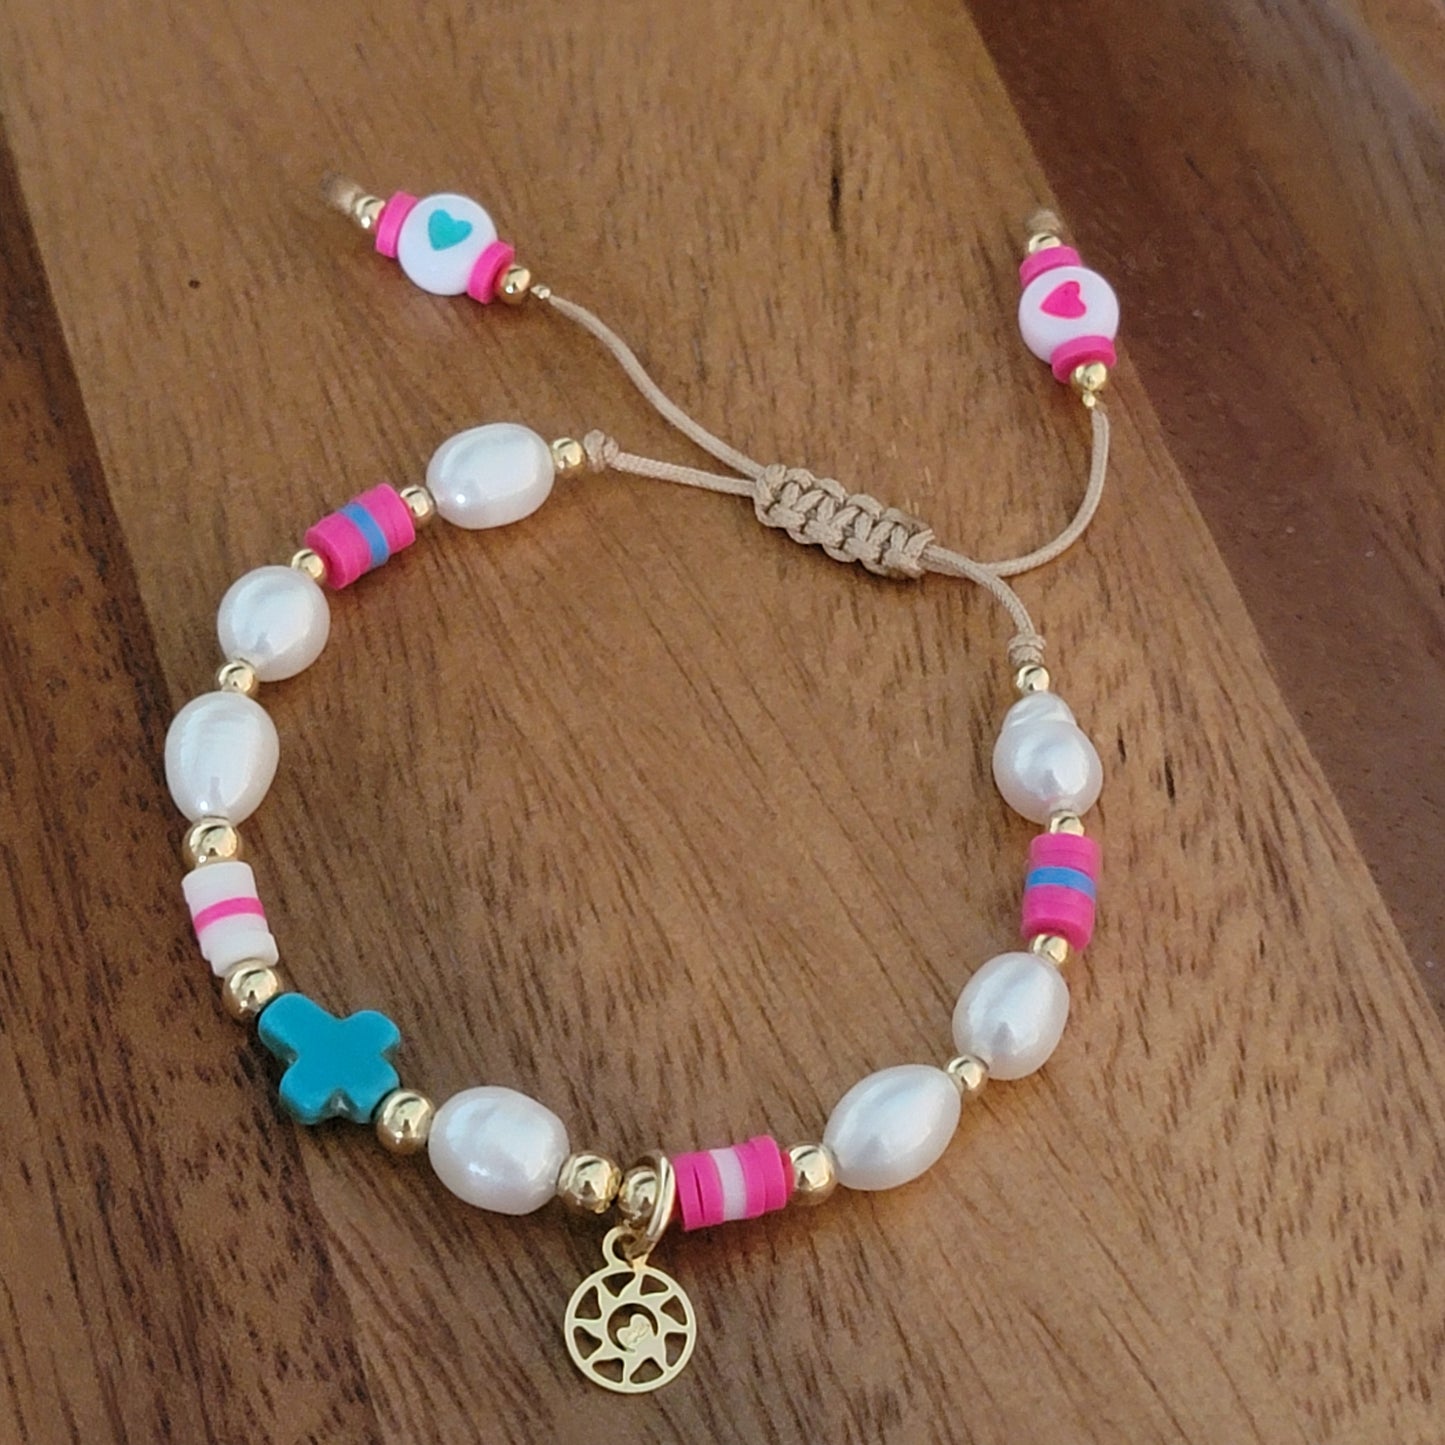 Handmade Colorful Disc Bead Bracelet with Freshwater Pearls and Turquoise Cross